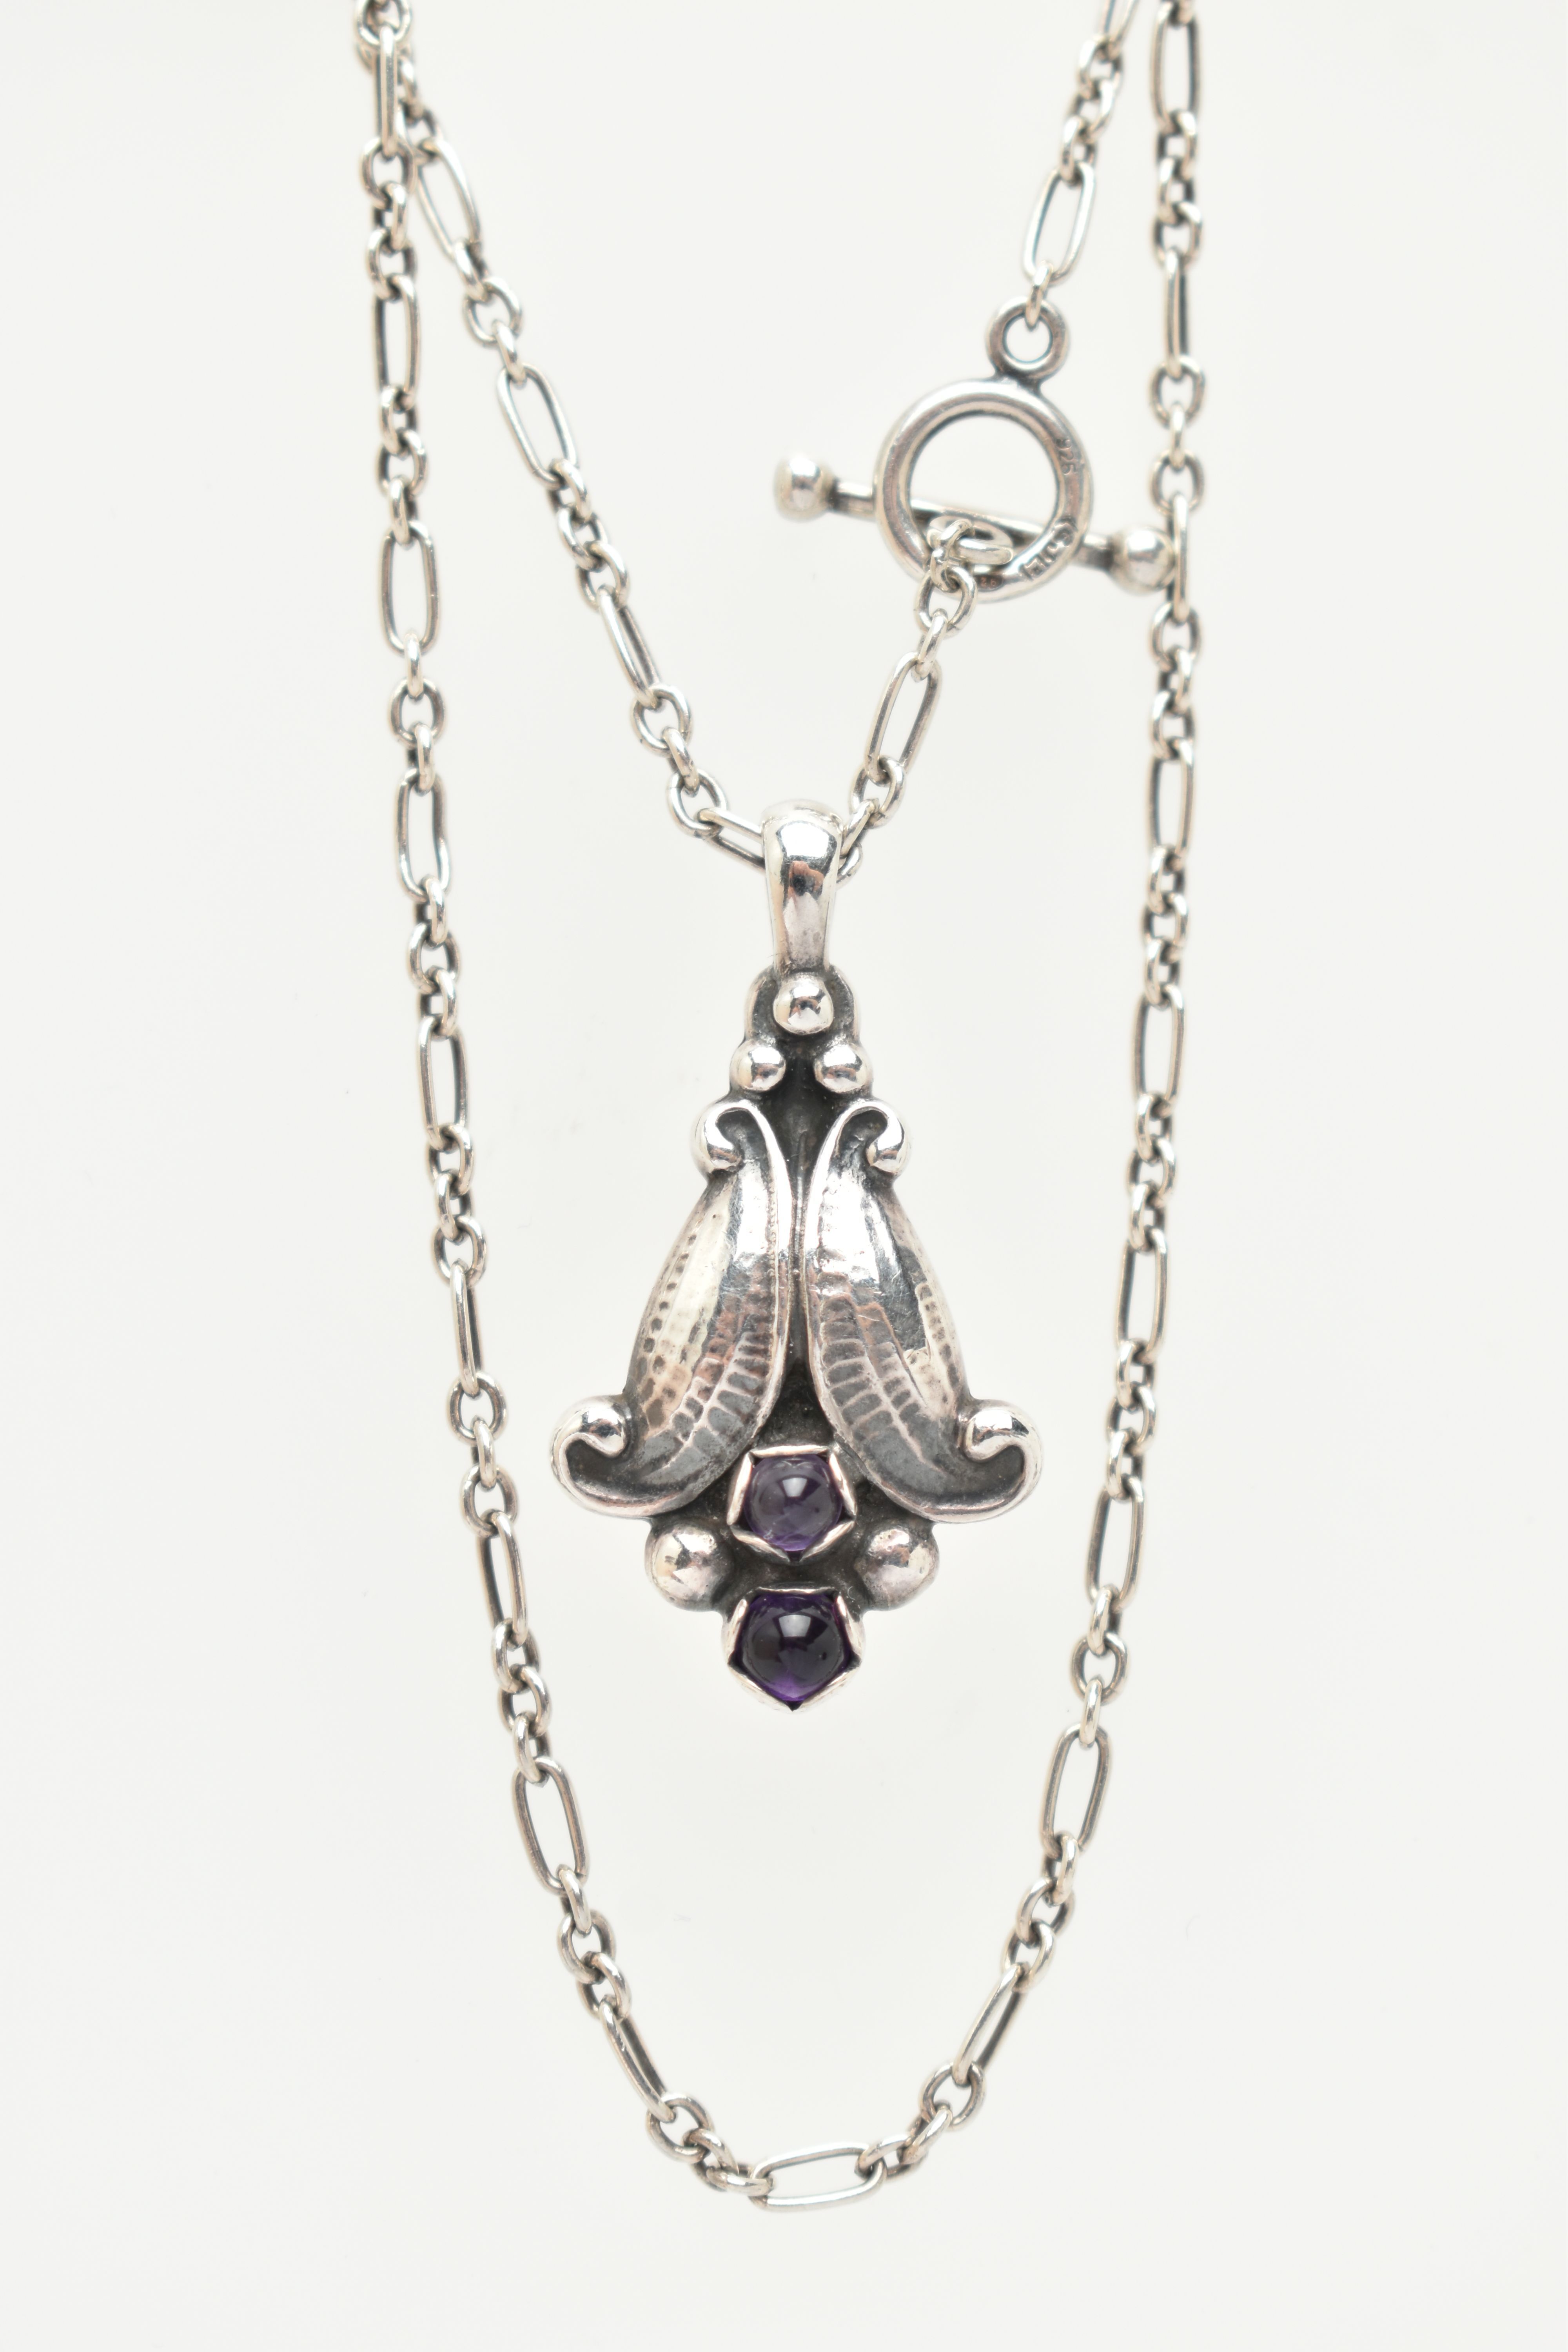 A BOXED 'GEORG JENSEN' PENDANT NECKLACE, floral drop pendant set with two amethyst dome cabochons, - Image 3 of 5